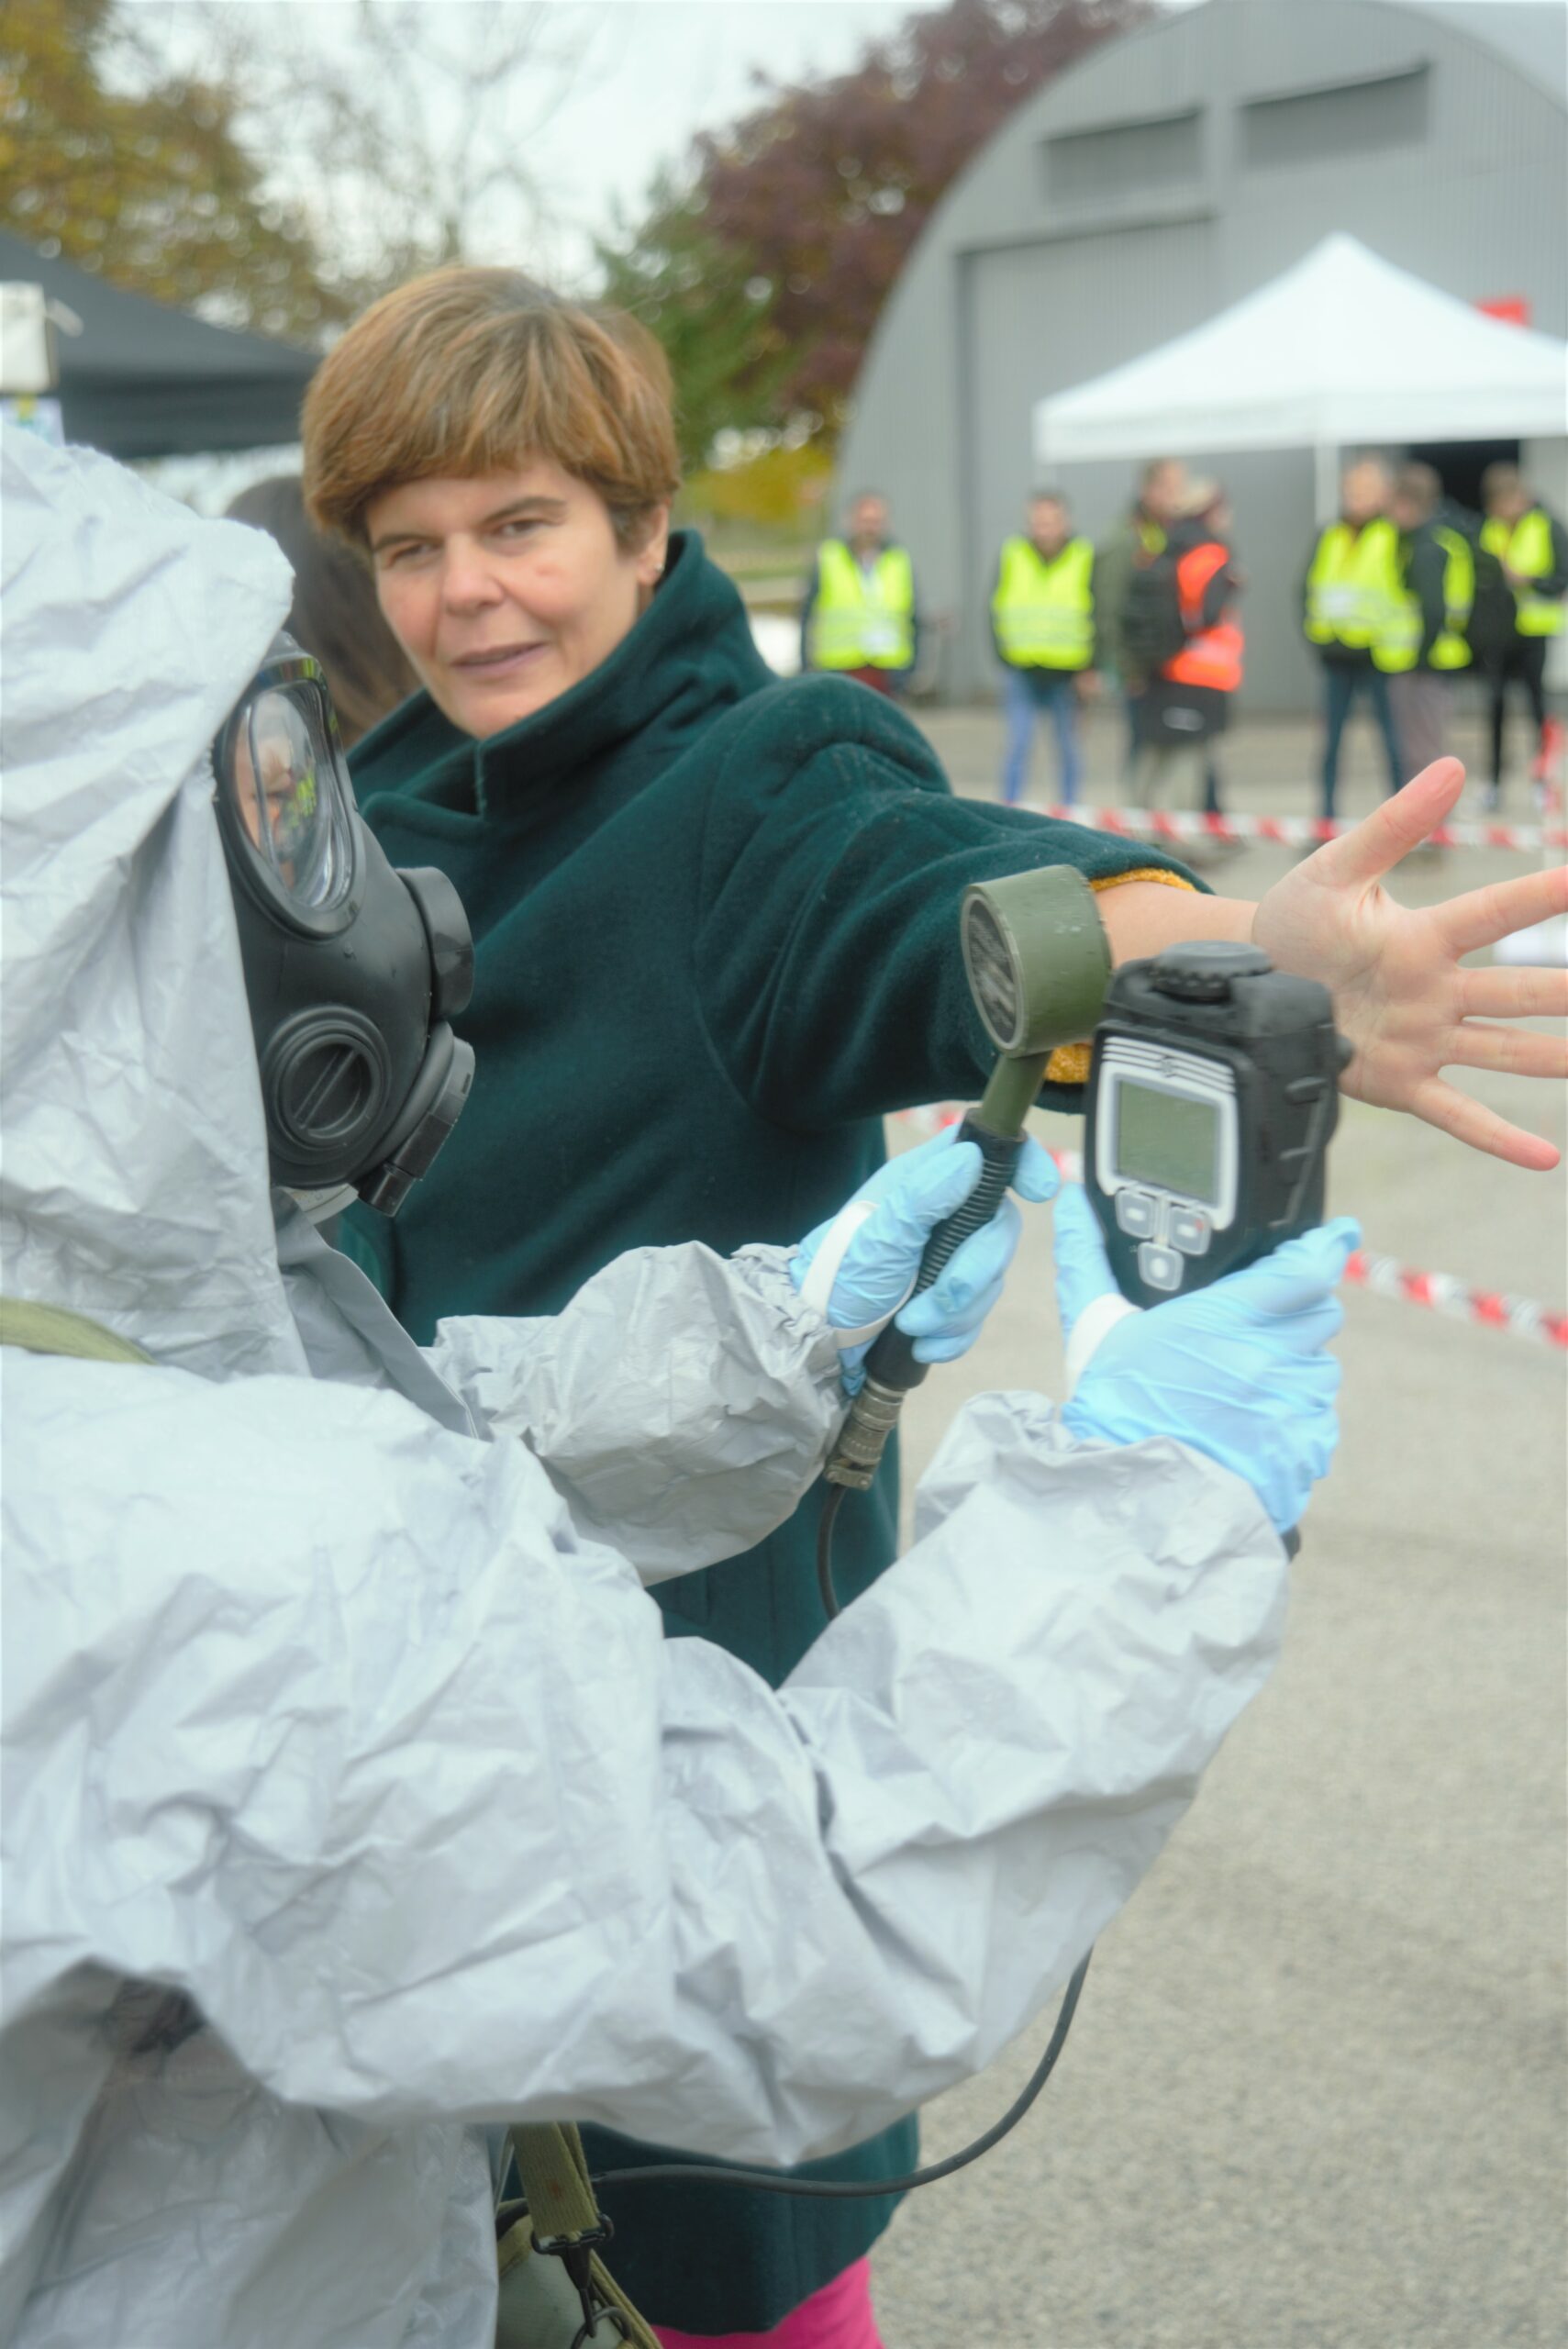 A person in a grey hazmat suit holding a special detector, with the screen in one hand and scanning tool in the other, is holding it up to a woman volunteer's arm. The woman volunteer is looking towards the respondent.